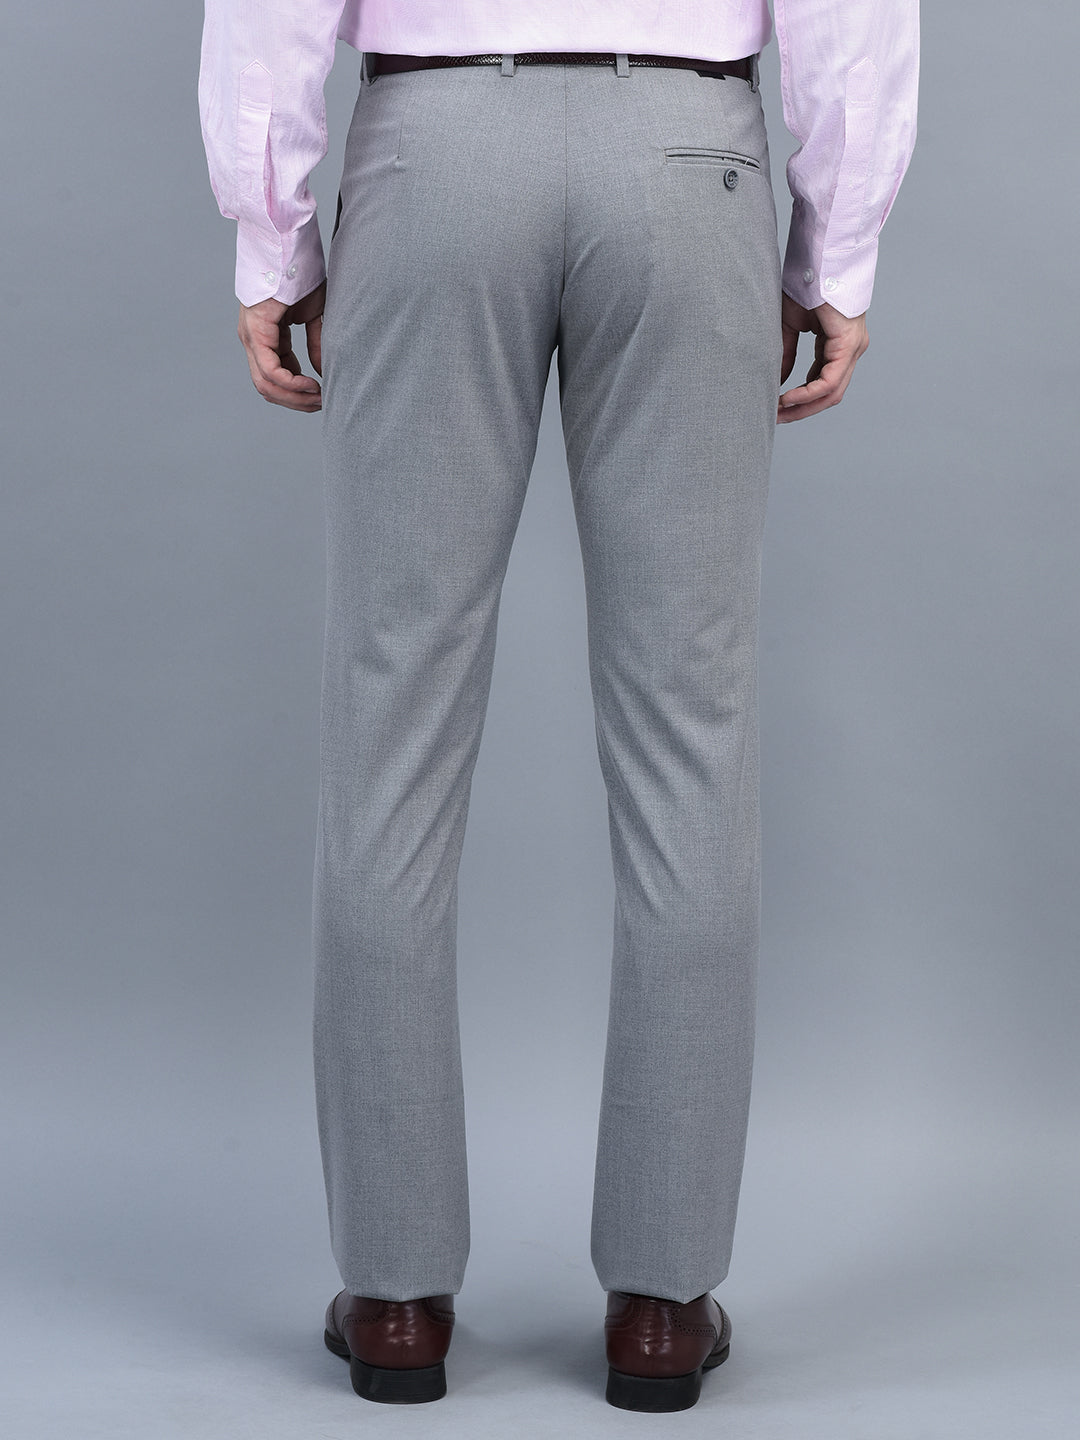 Buy Cobb Trousers online - Men - 17 products | FASHIOLA.in